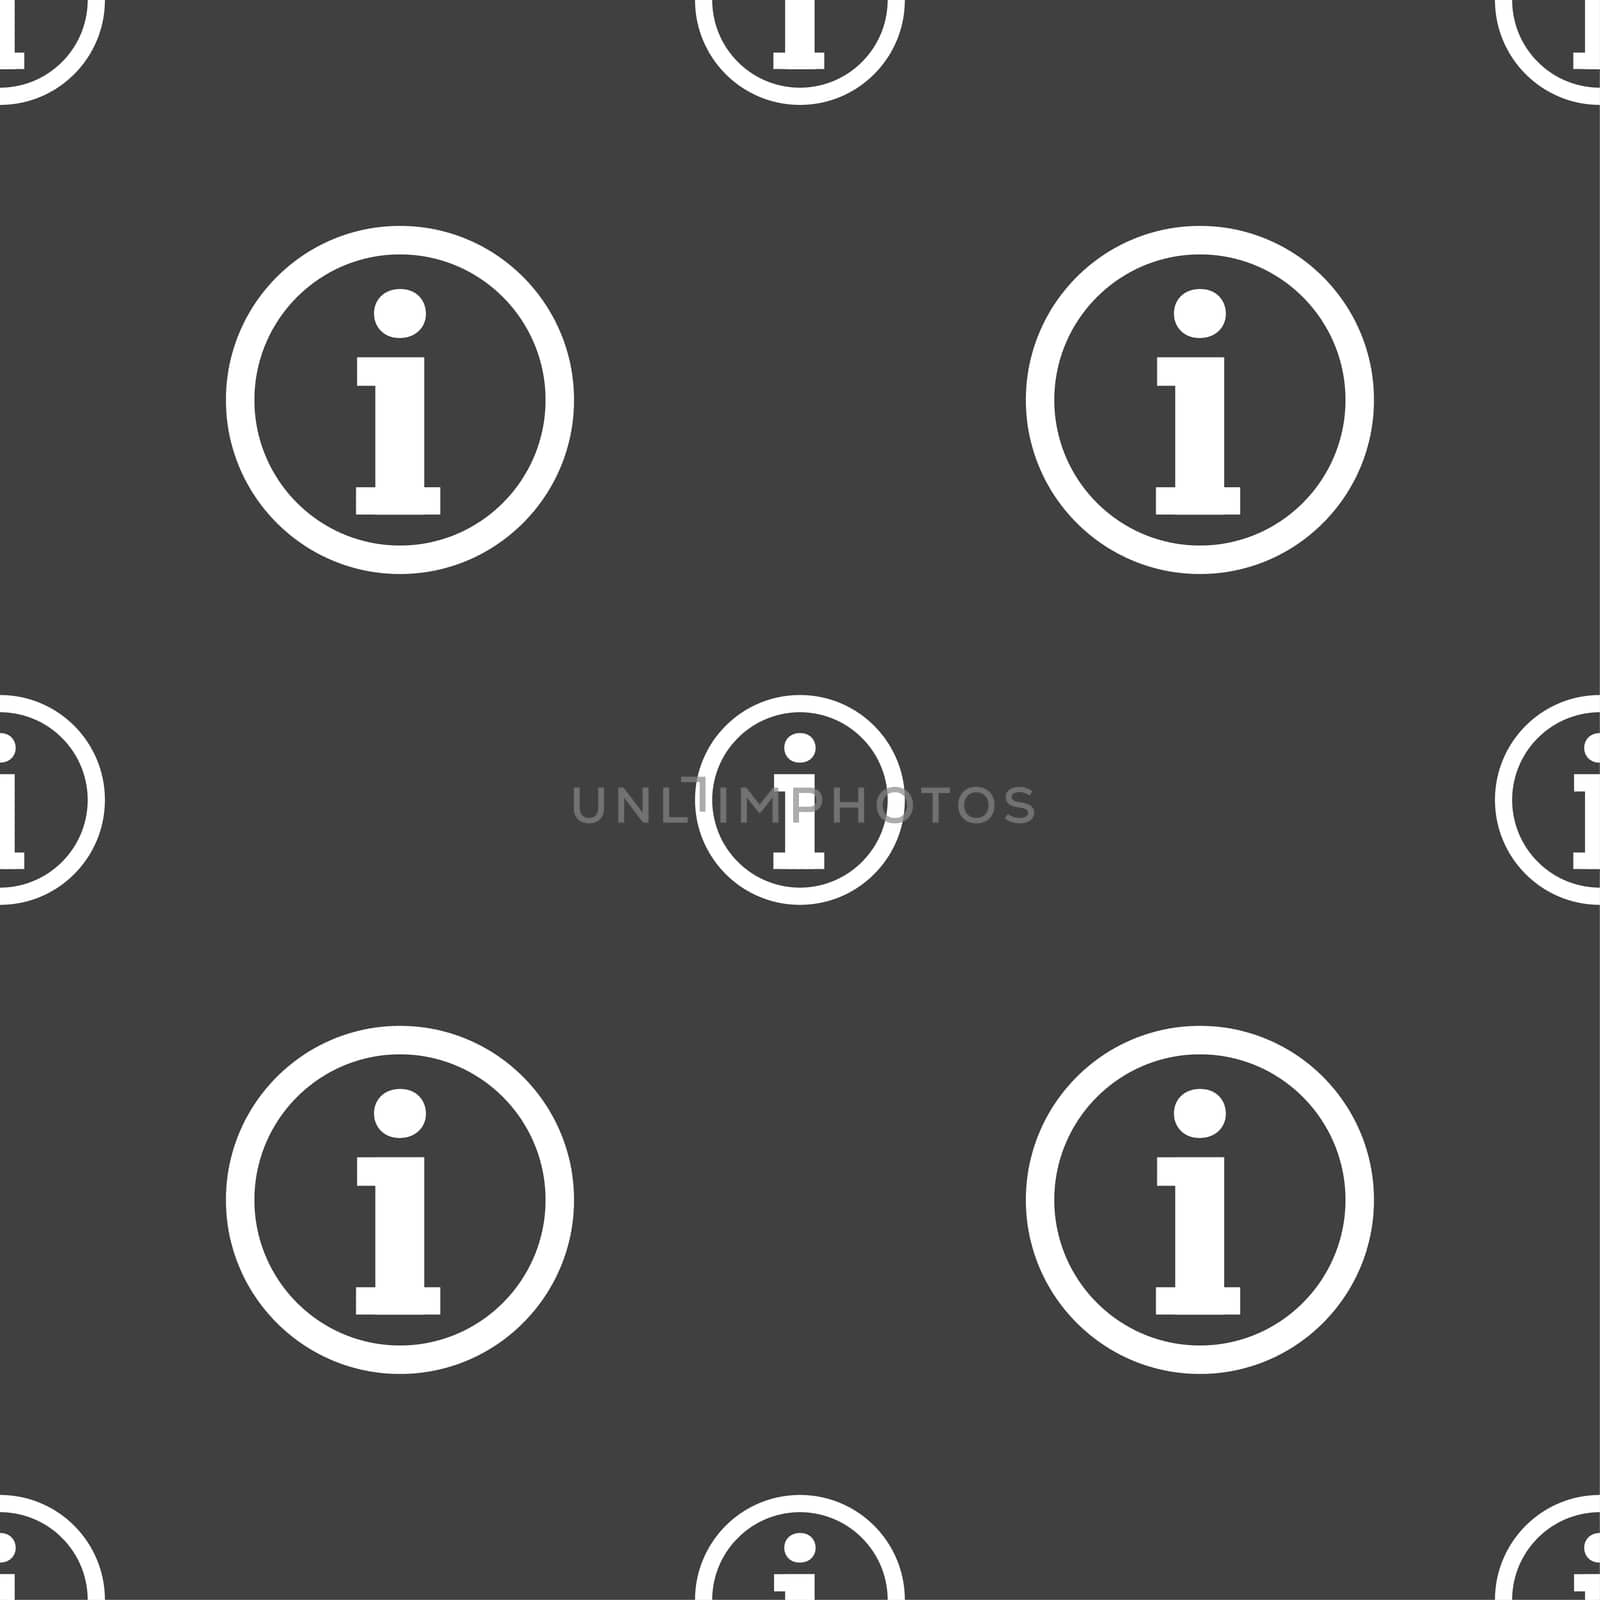 Information sign icon. Info speech bubble symbol. Seamless pattern on a gray background. illustration